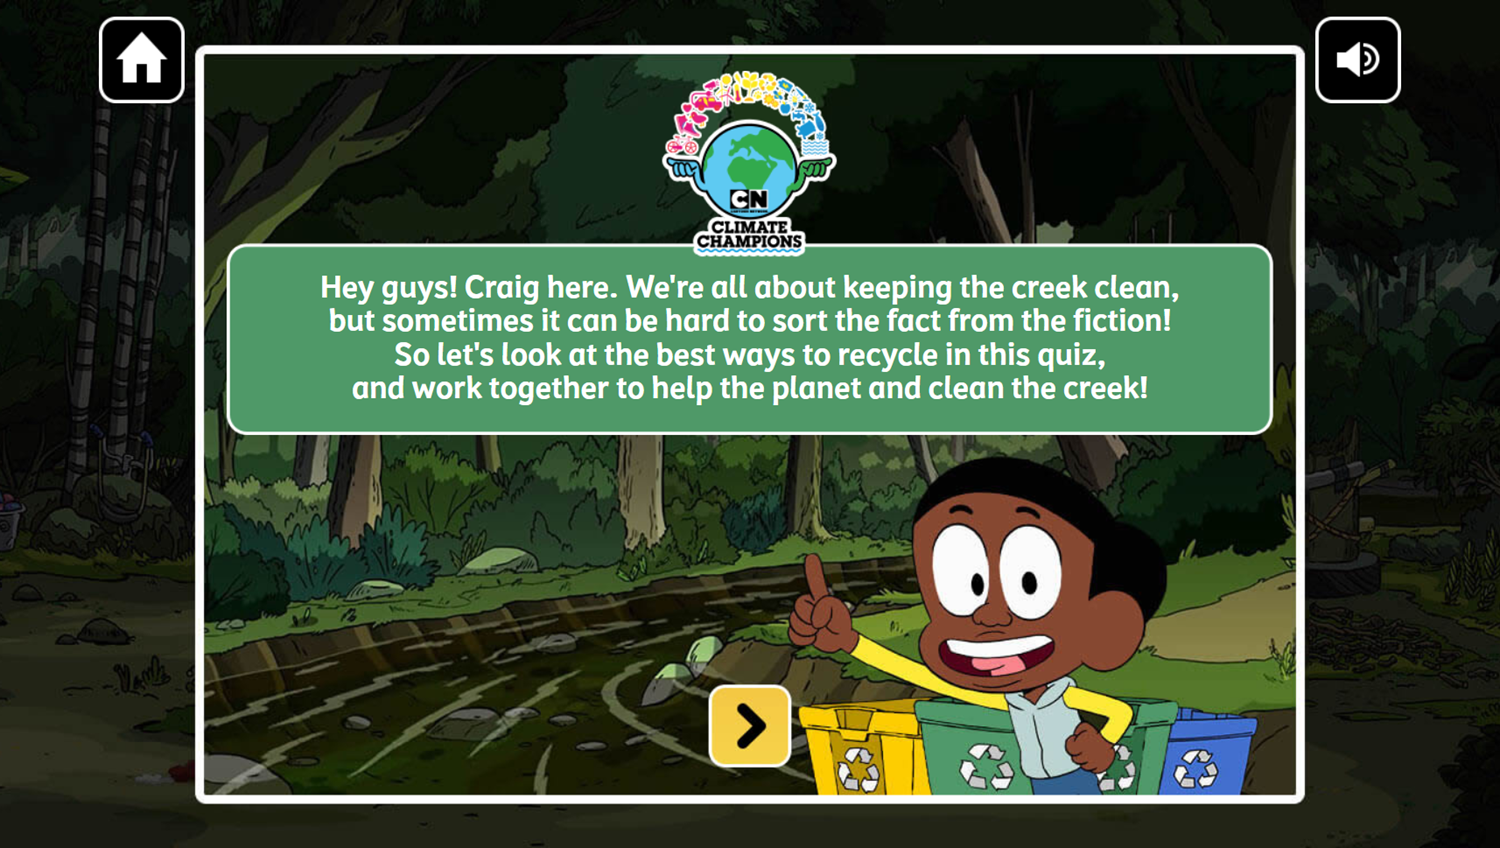 Craig of the Creek Recycling Mythbusters Game Introduction Screenshot.